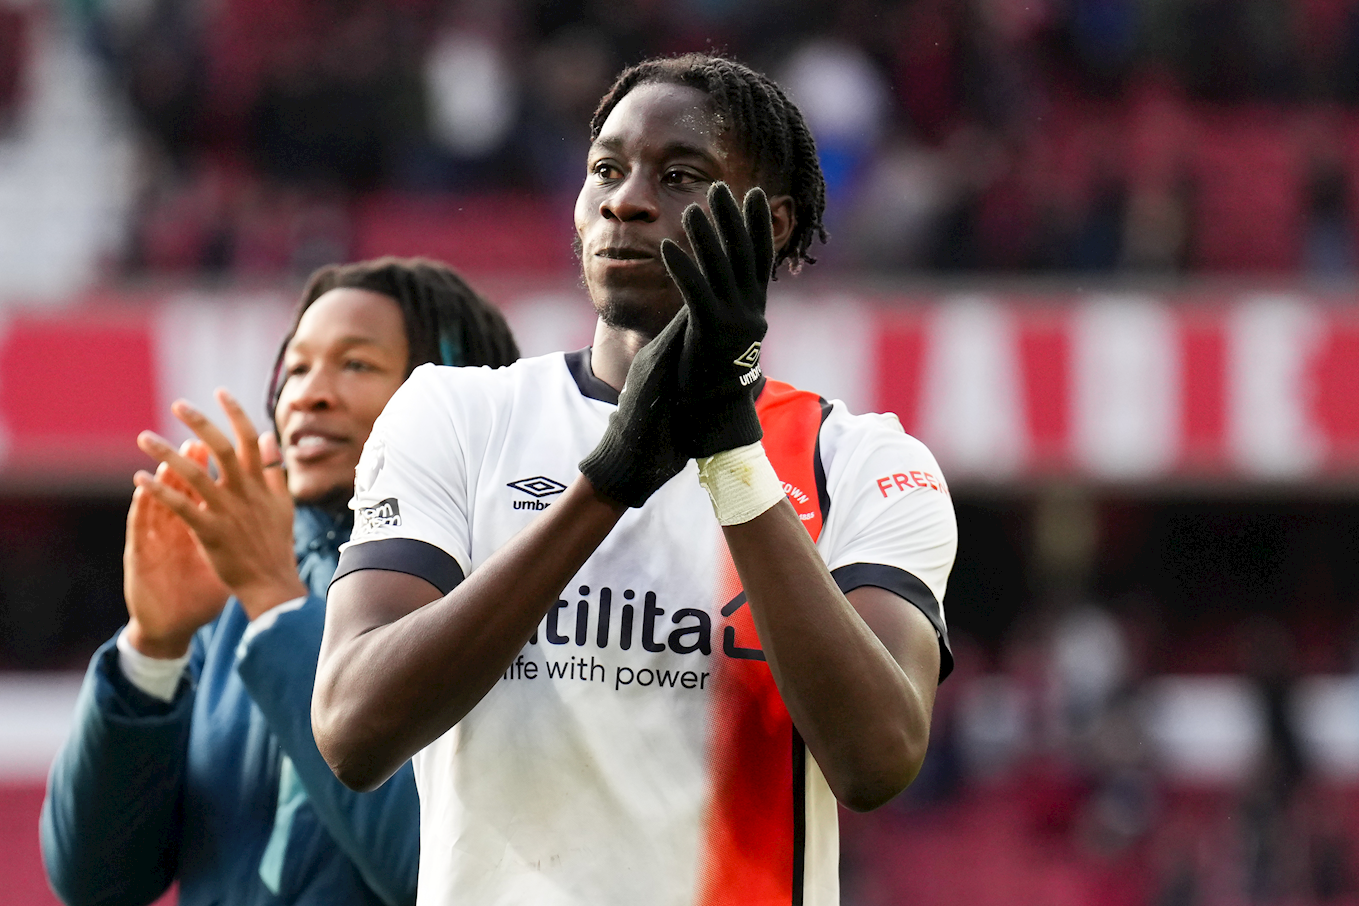 Elijah Adebayo clapping the Luton Town fans at Nottingham Forest.